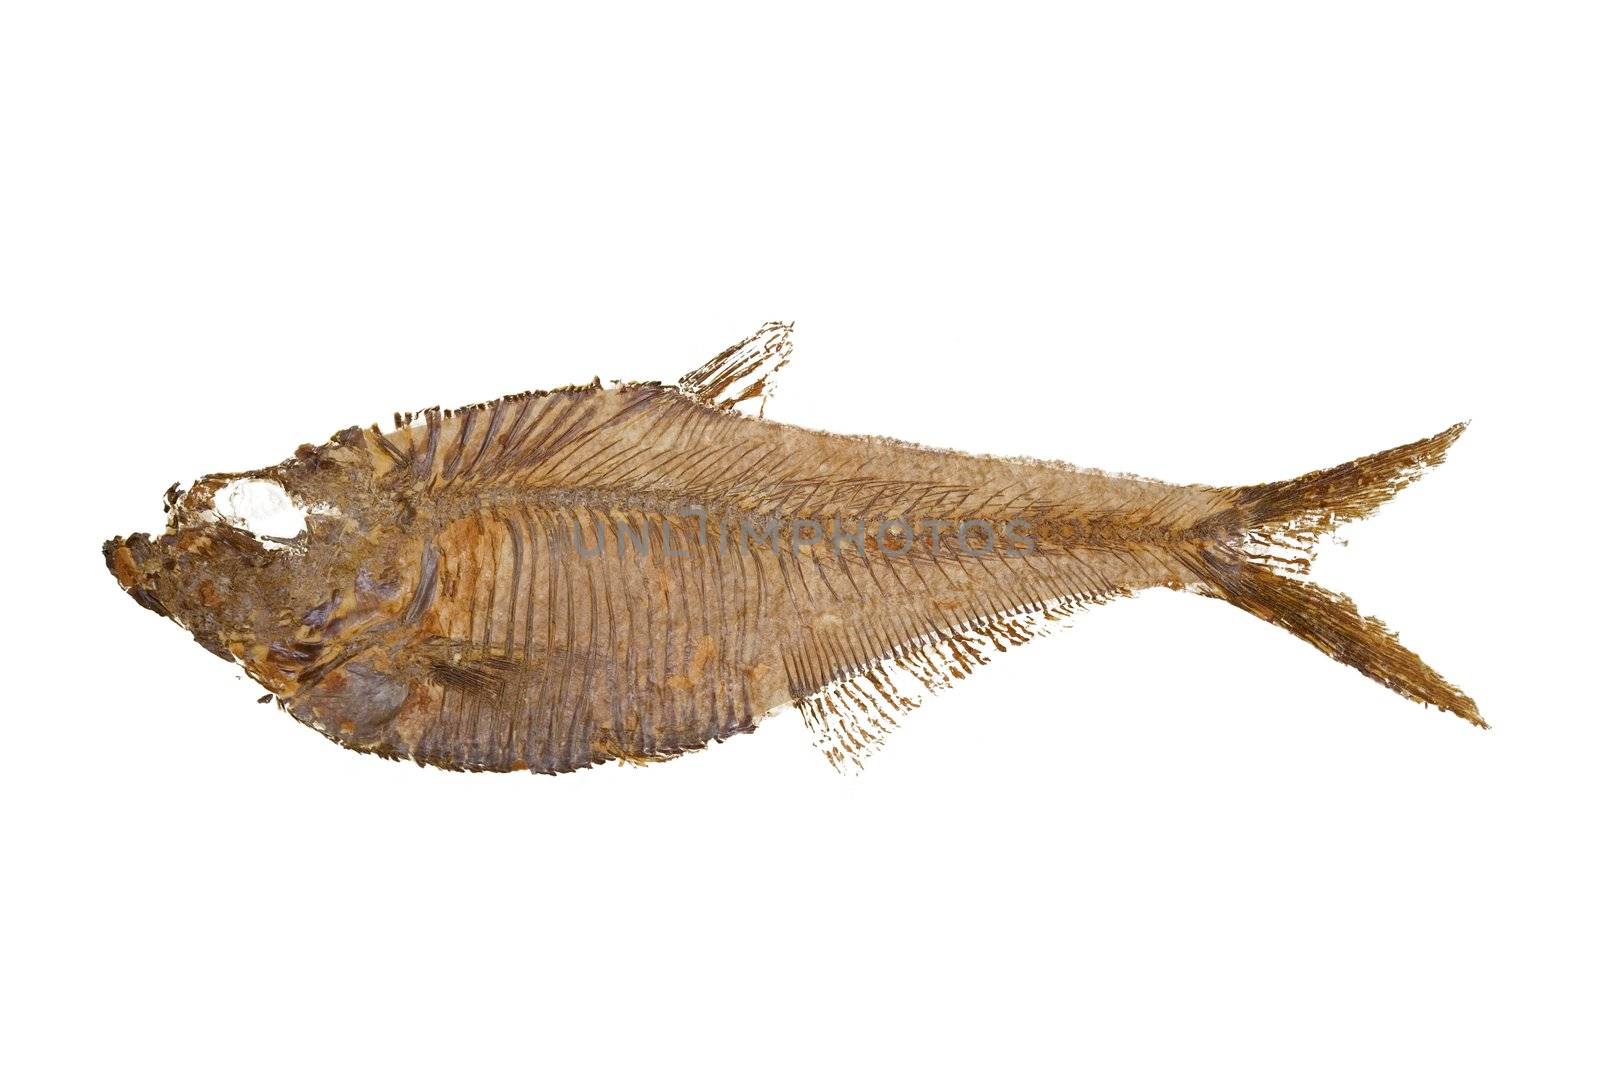 Macro image of a Fish Fossil (Diplomystus dentatus) originating from the Green River Formation of Wyoming, USA. This fossil is from the Eocene Period and is about 40 to 50 milliion years old.